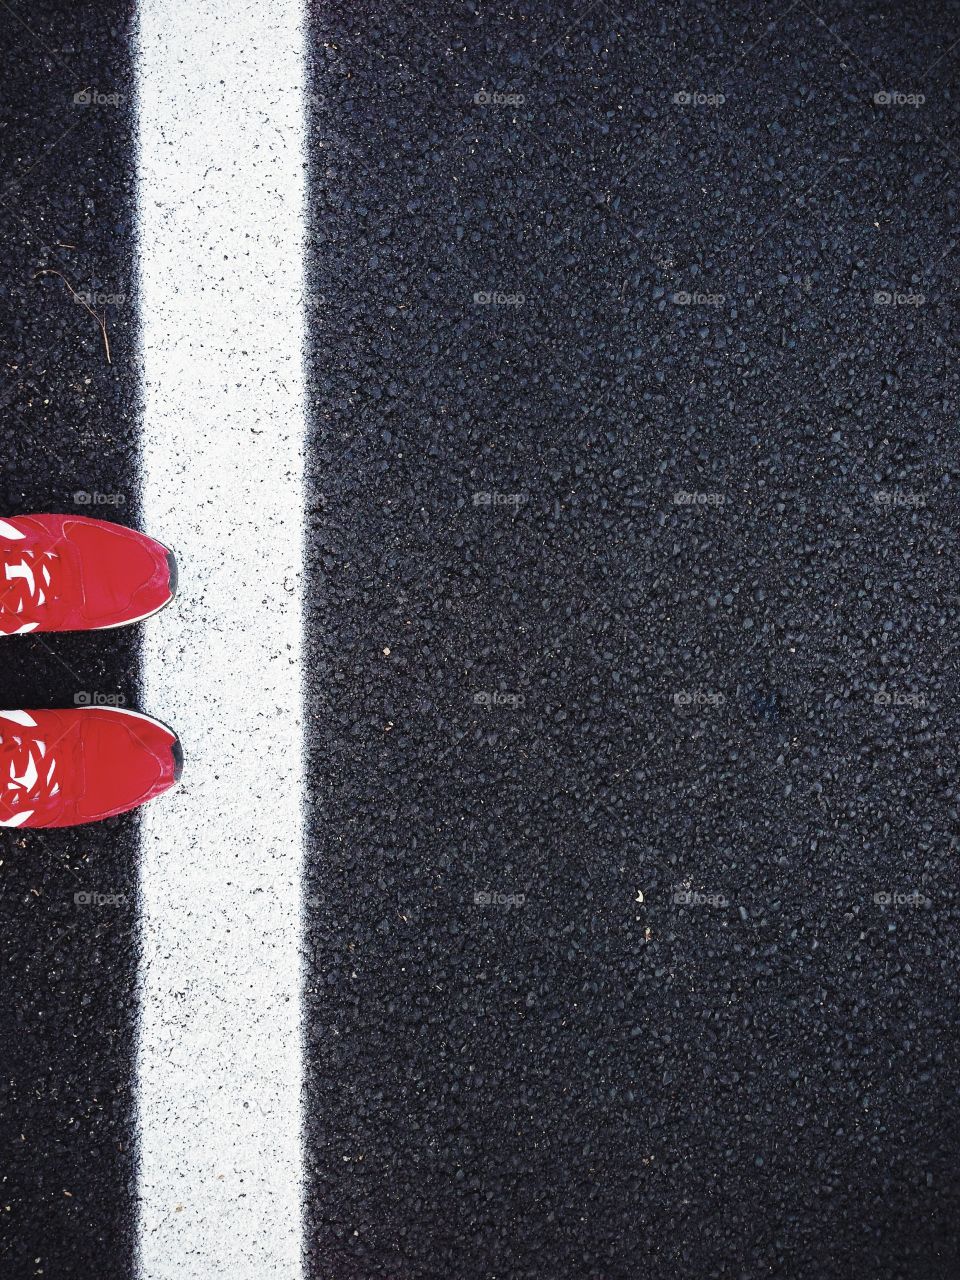 A pair of mans ted shoes standing over a black asphalt road, touching the white stripe with the tip.